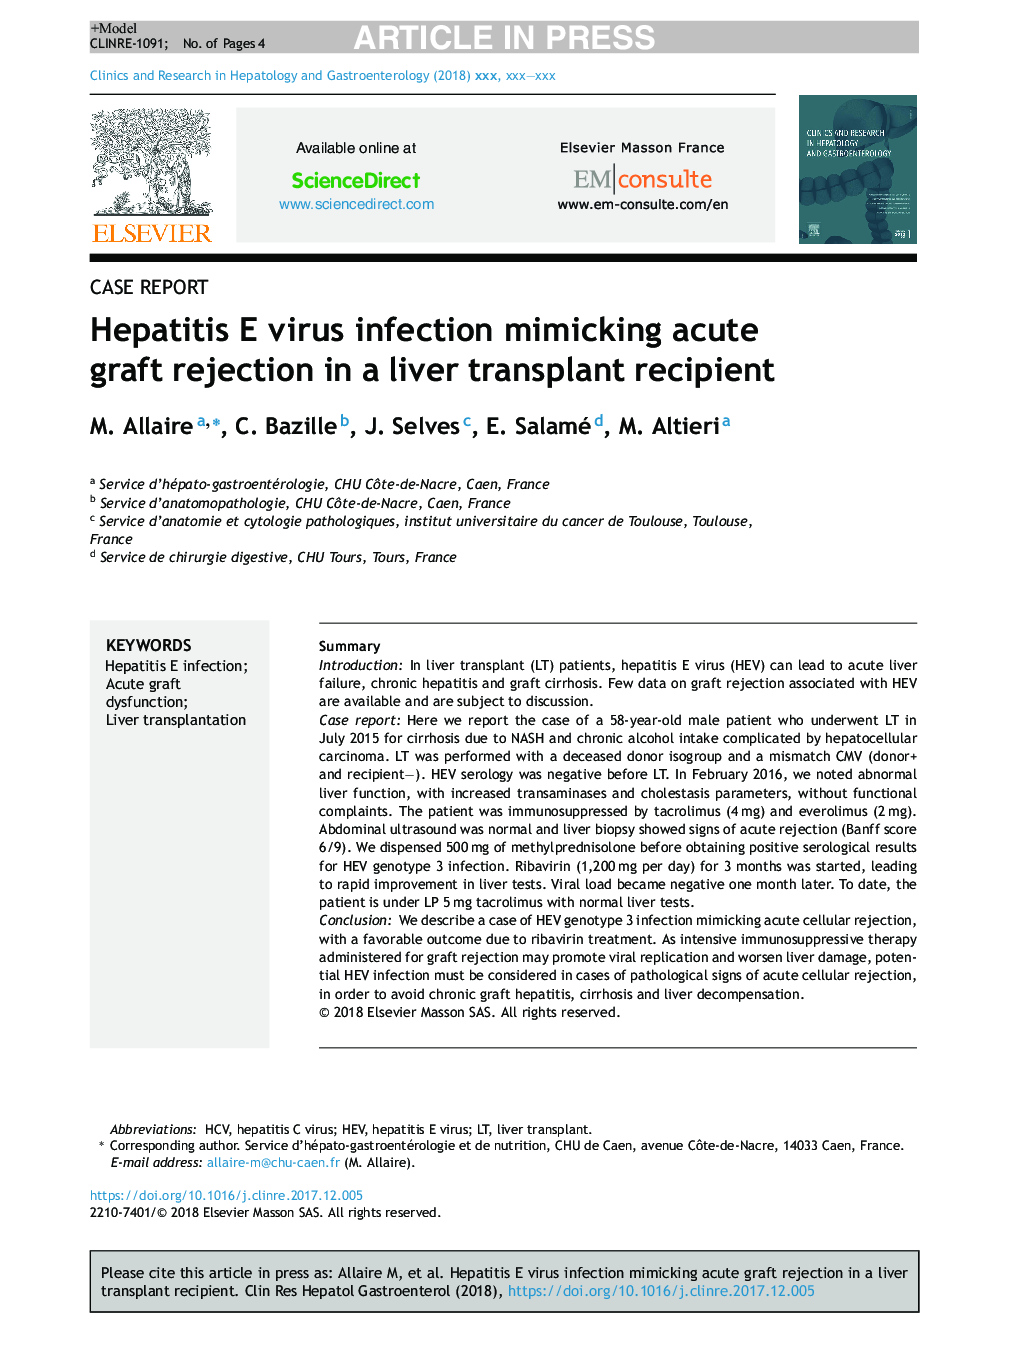 Hepatitis E virus infection mimicking acute graft rejection in a liver transplant recipient